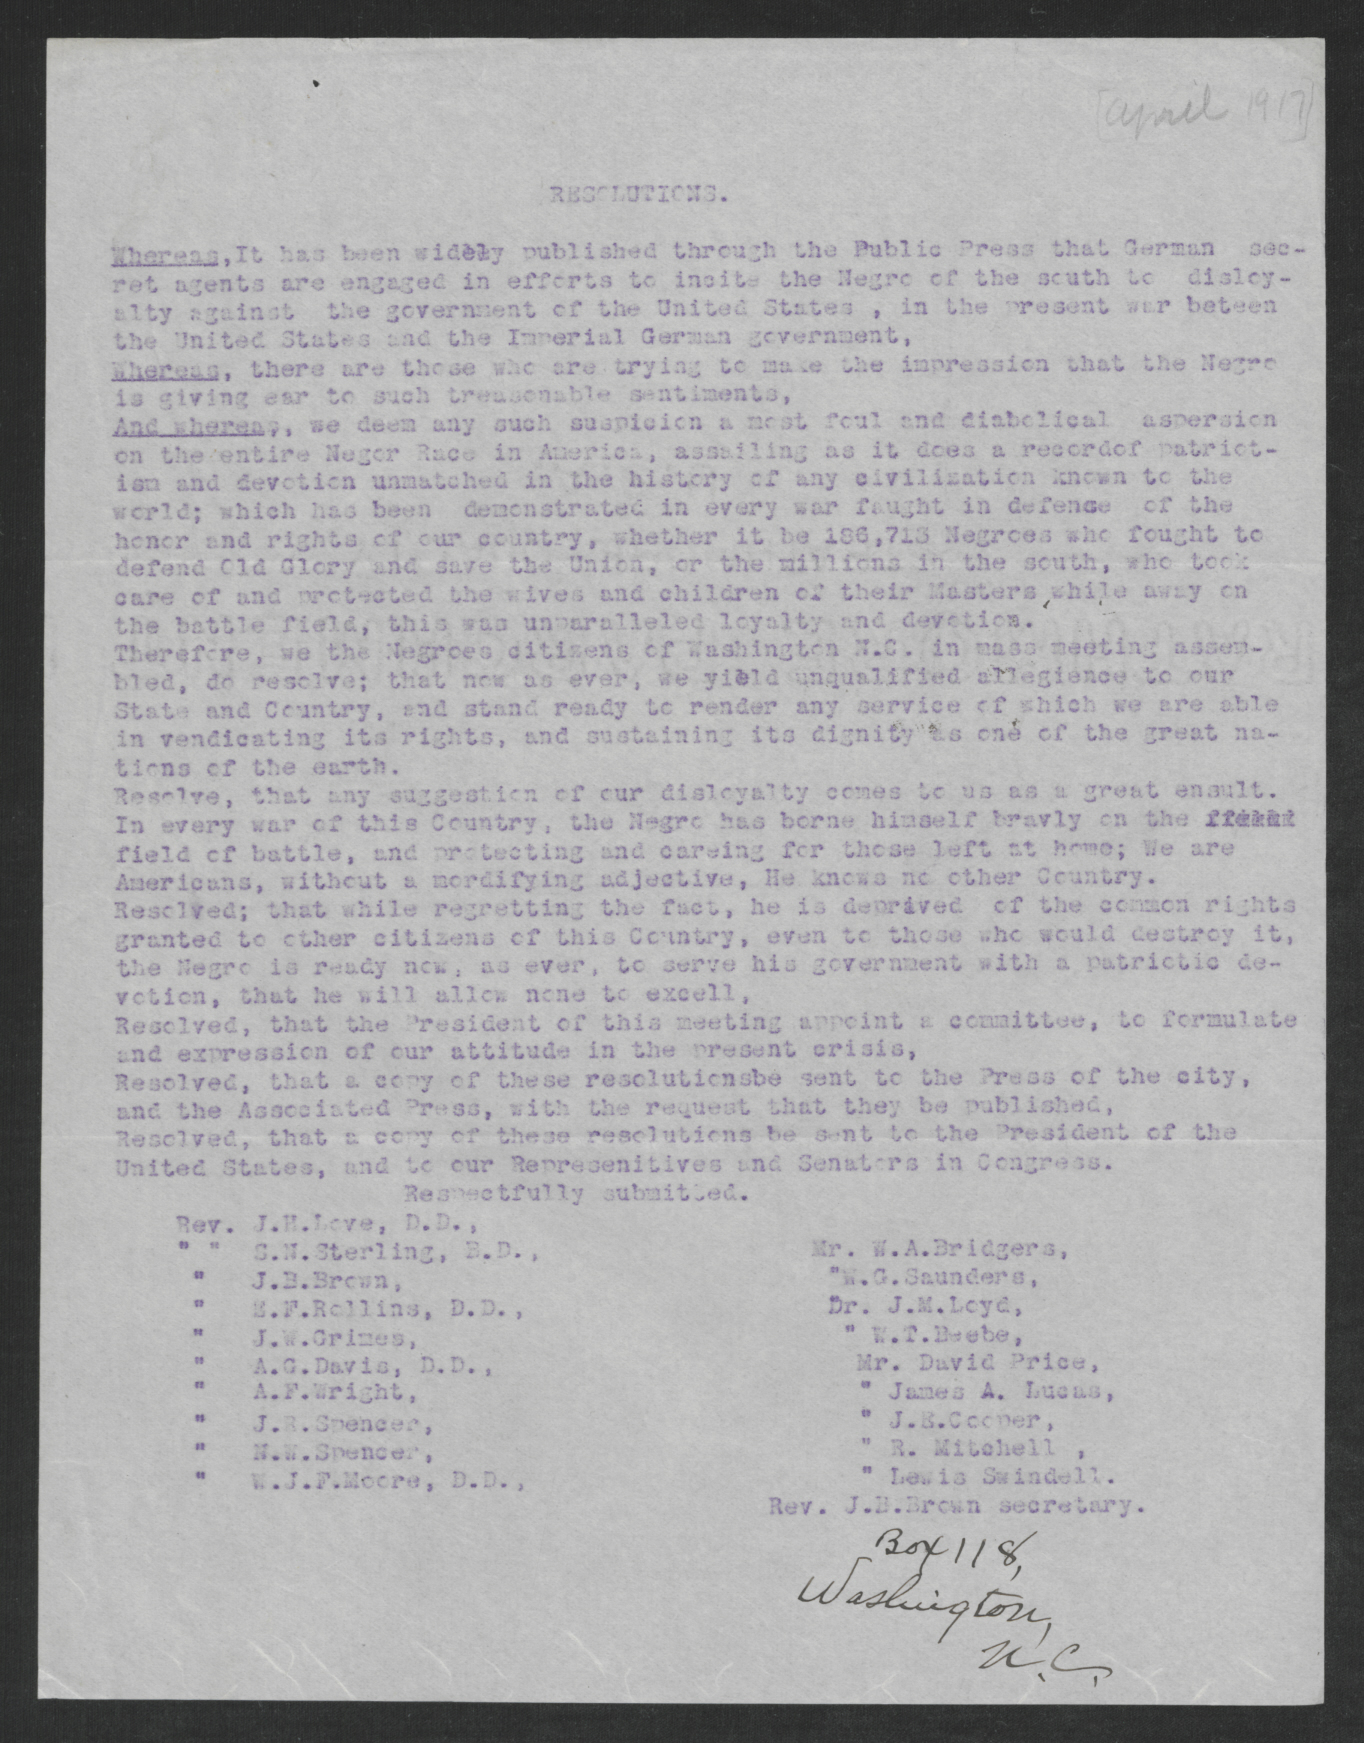 Resolution by the African American Citizens of Washington, N.C., April 1917